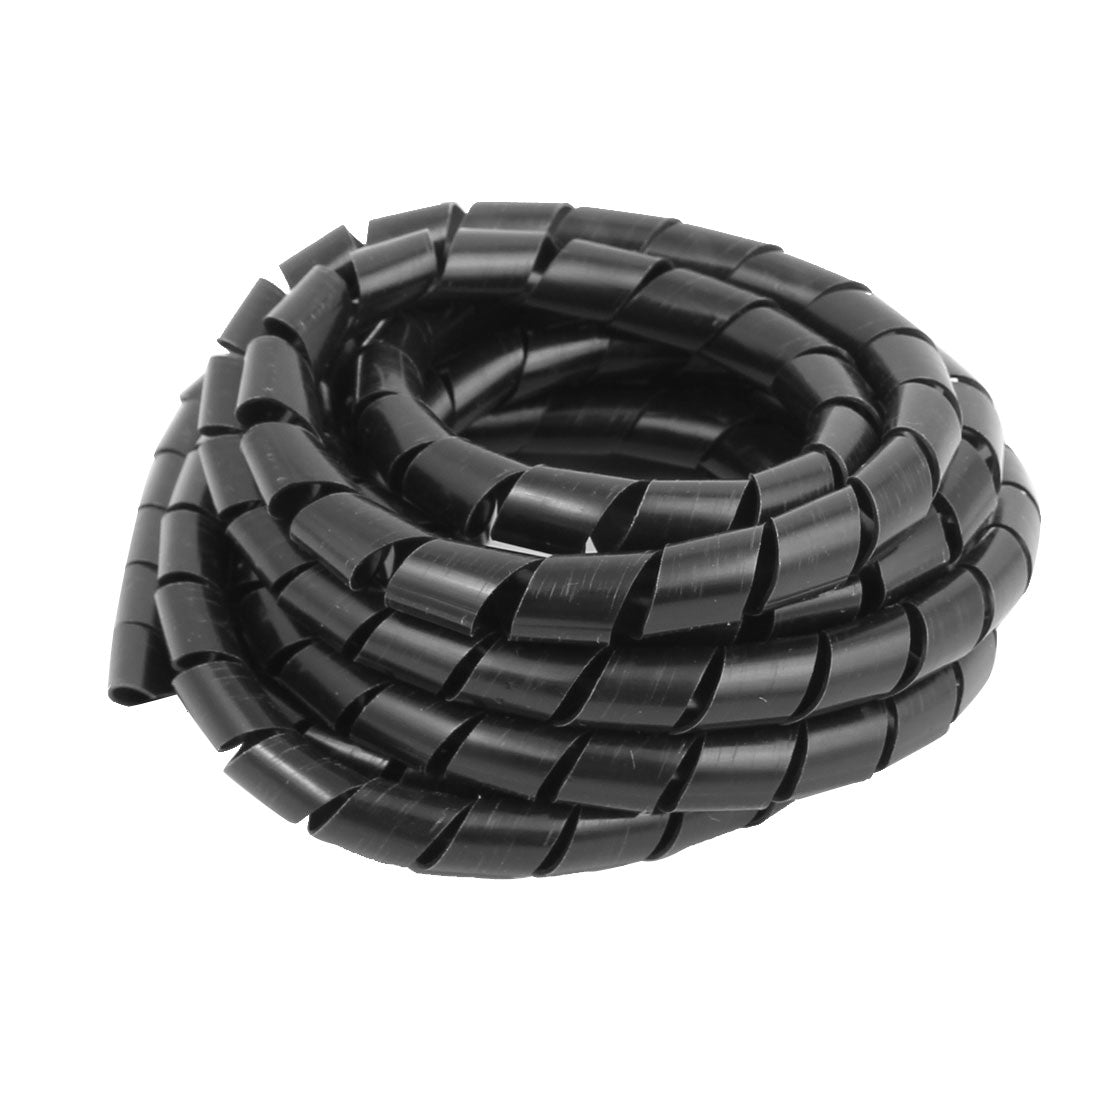 uxcell Uxcell 8.9Ft 2.7M Length 10mm OD Flexible Spiral Tube Wrap Cable Wire Computer Cord Manager Black